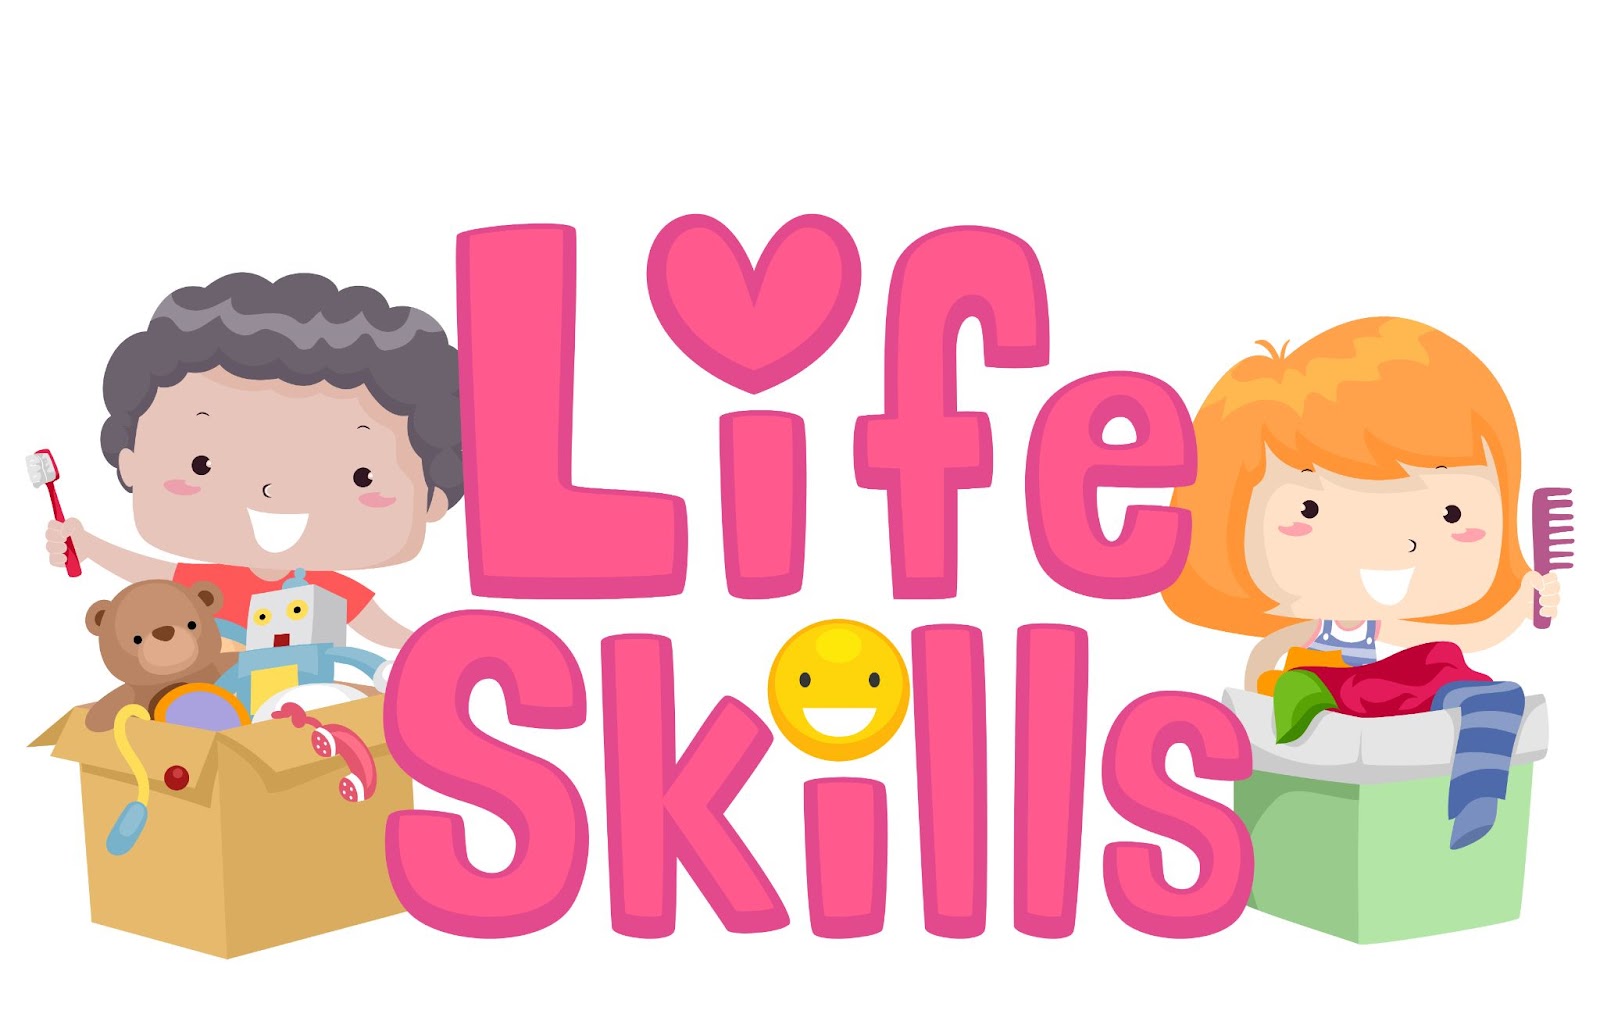 20 life skills activities to help your child succeed